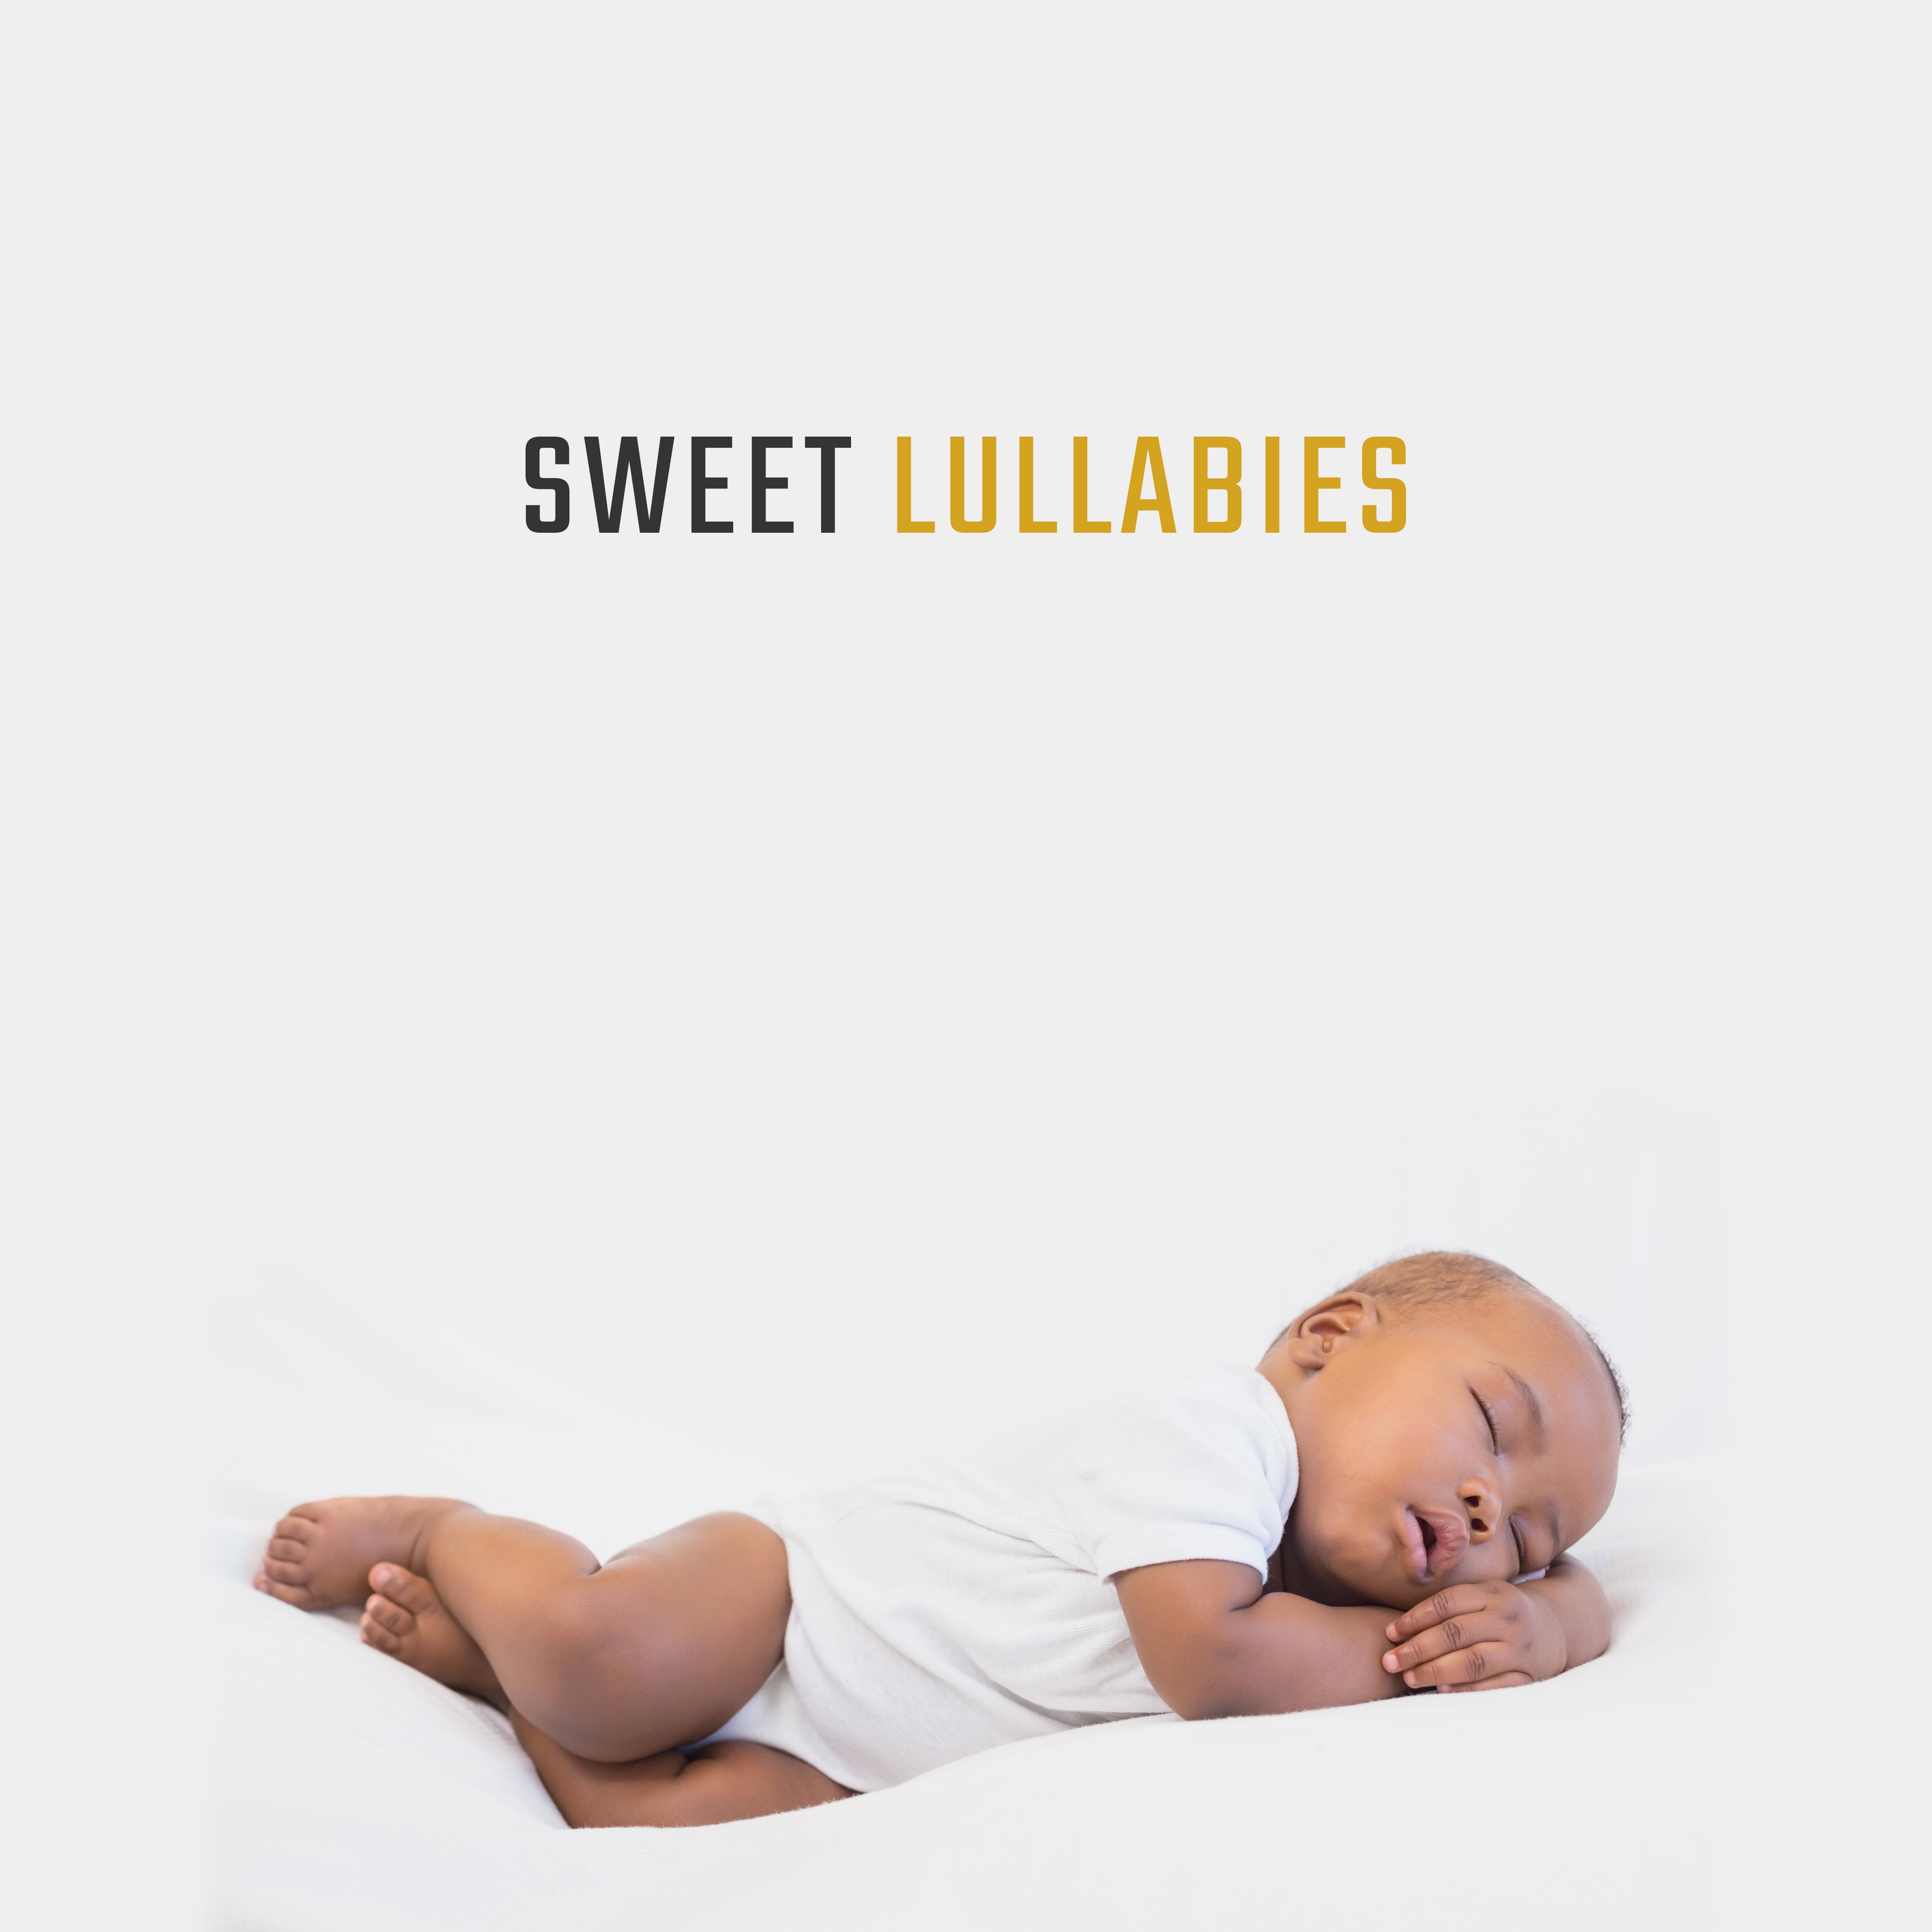 Sweet Lullabies: 15 Soothing Sounds for Kids, Bedtime Baby, Music Reduces Stress, Relaxing Melodies for Kids, Cradle Songs 2019